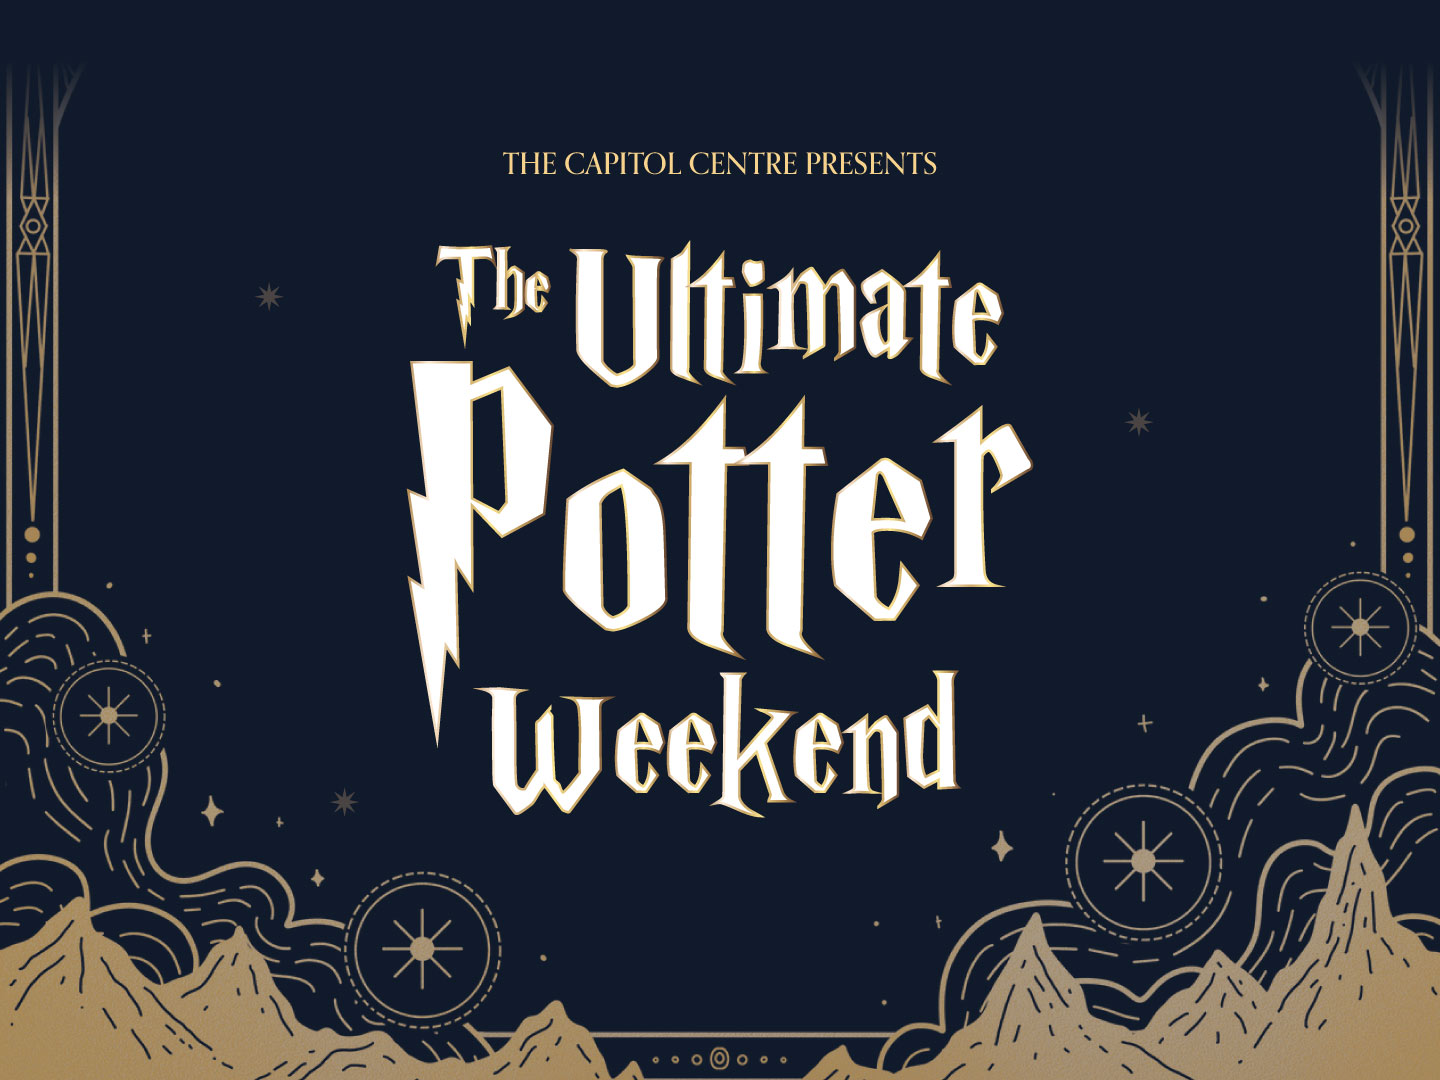 The Ultimate Potter Weekend